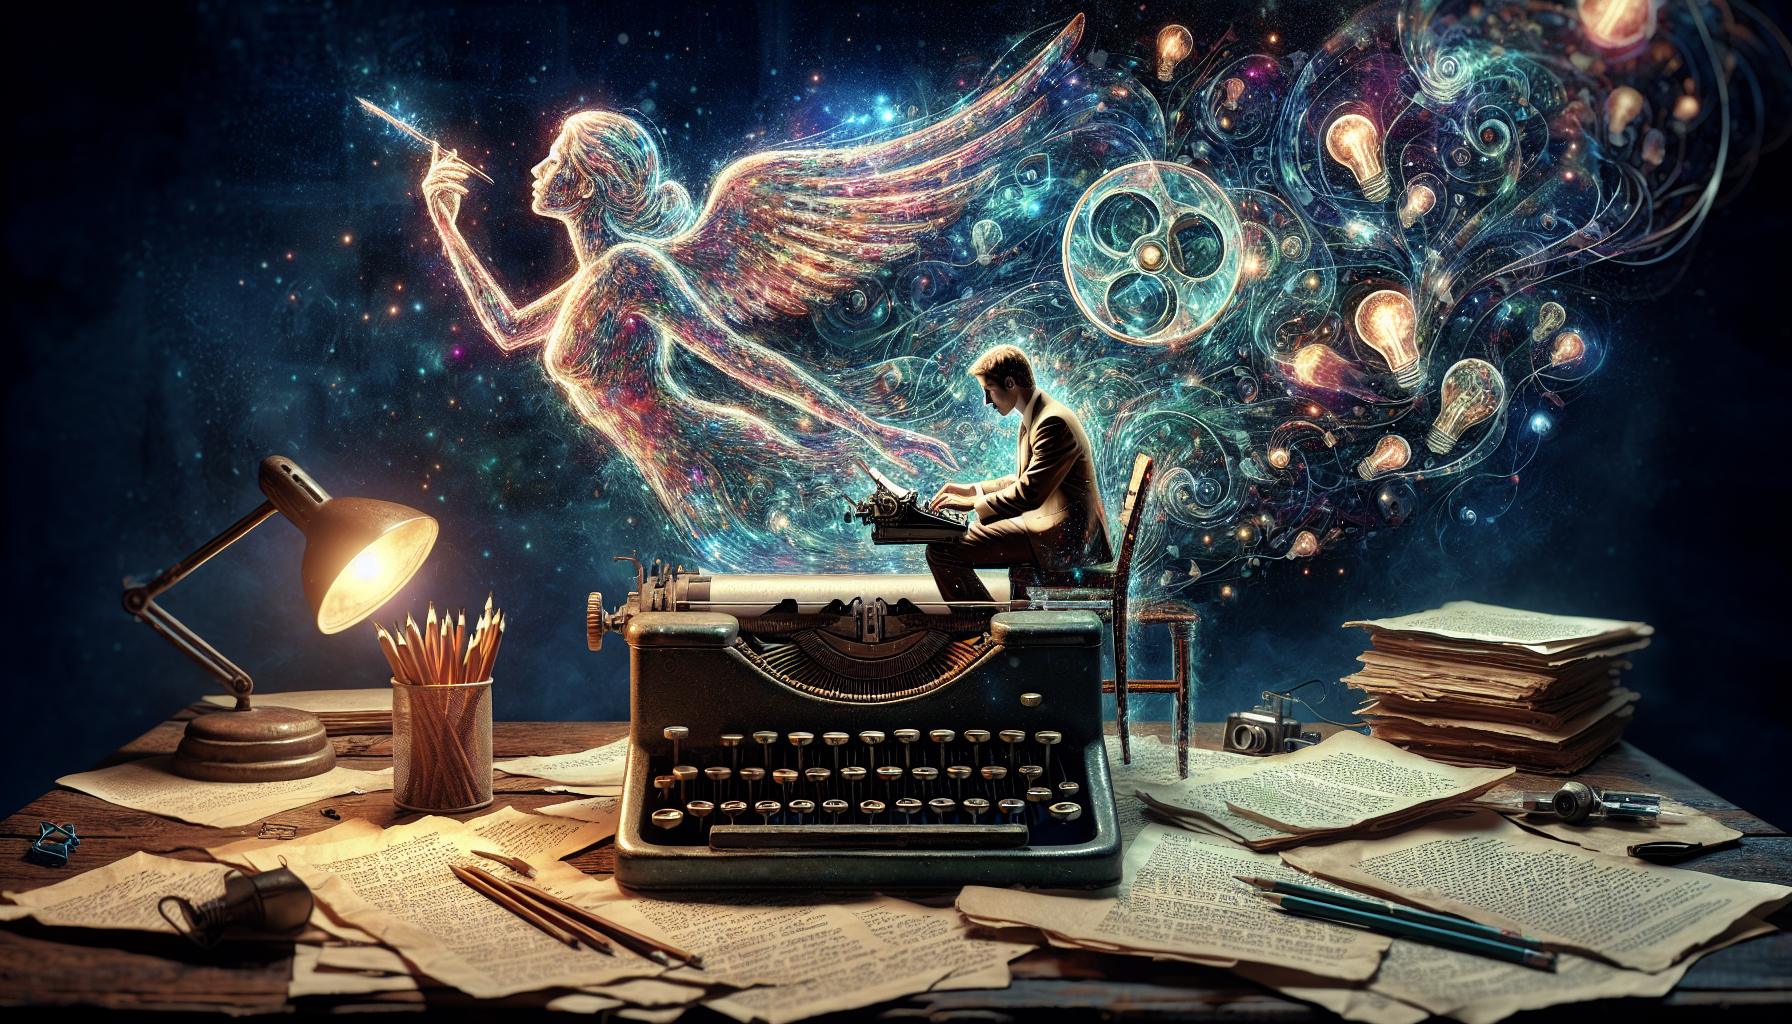 A vintage typewriter on an old wooden desk with scattered screenplay pages, in the background, a shimmering, translucent figure of a muse whispering ideas into the ear of a focused writer typing, surr